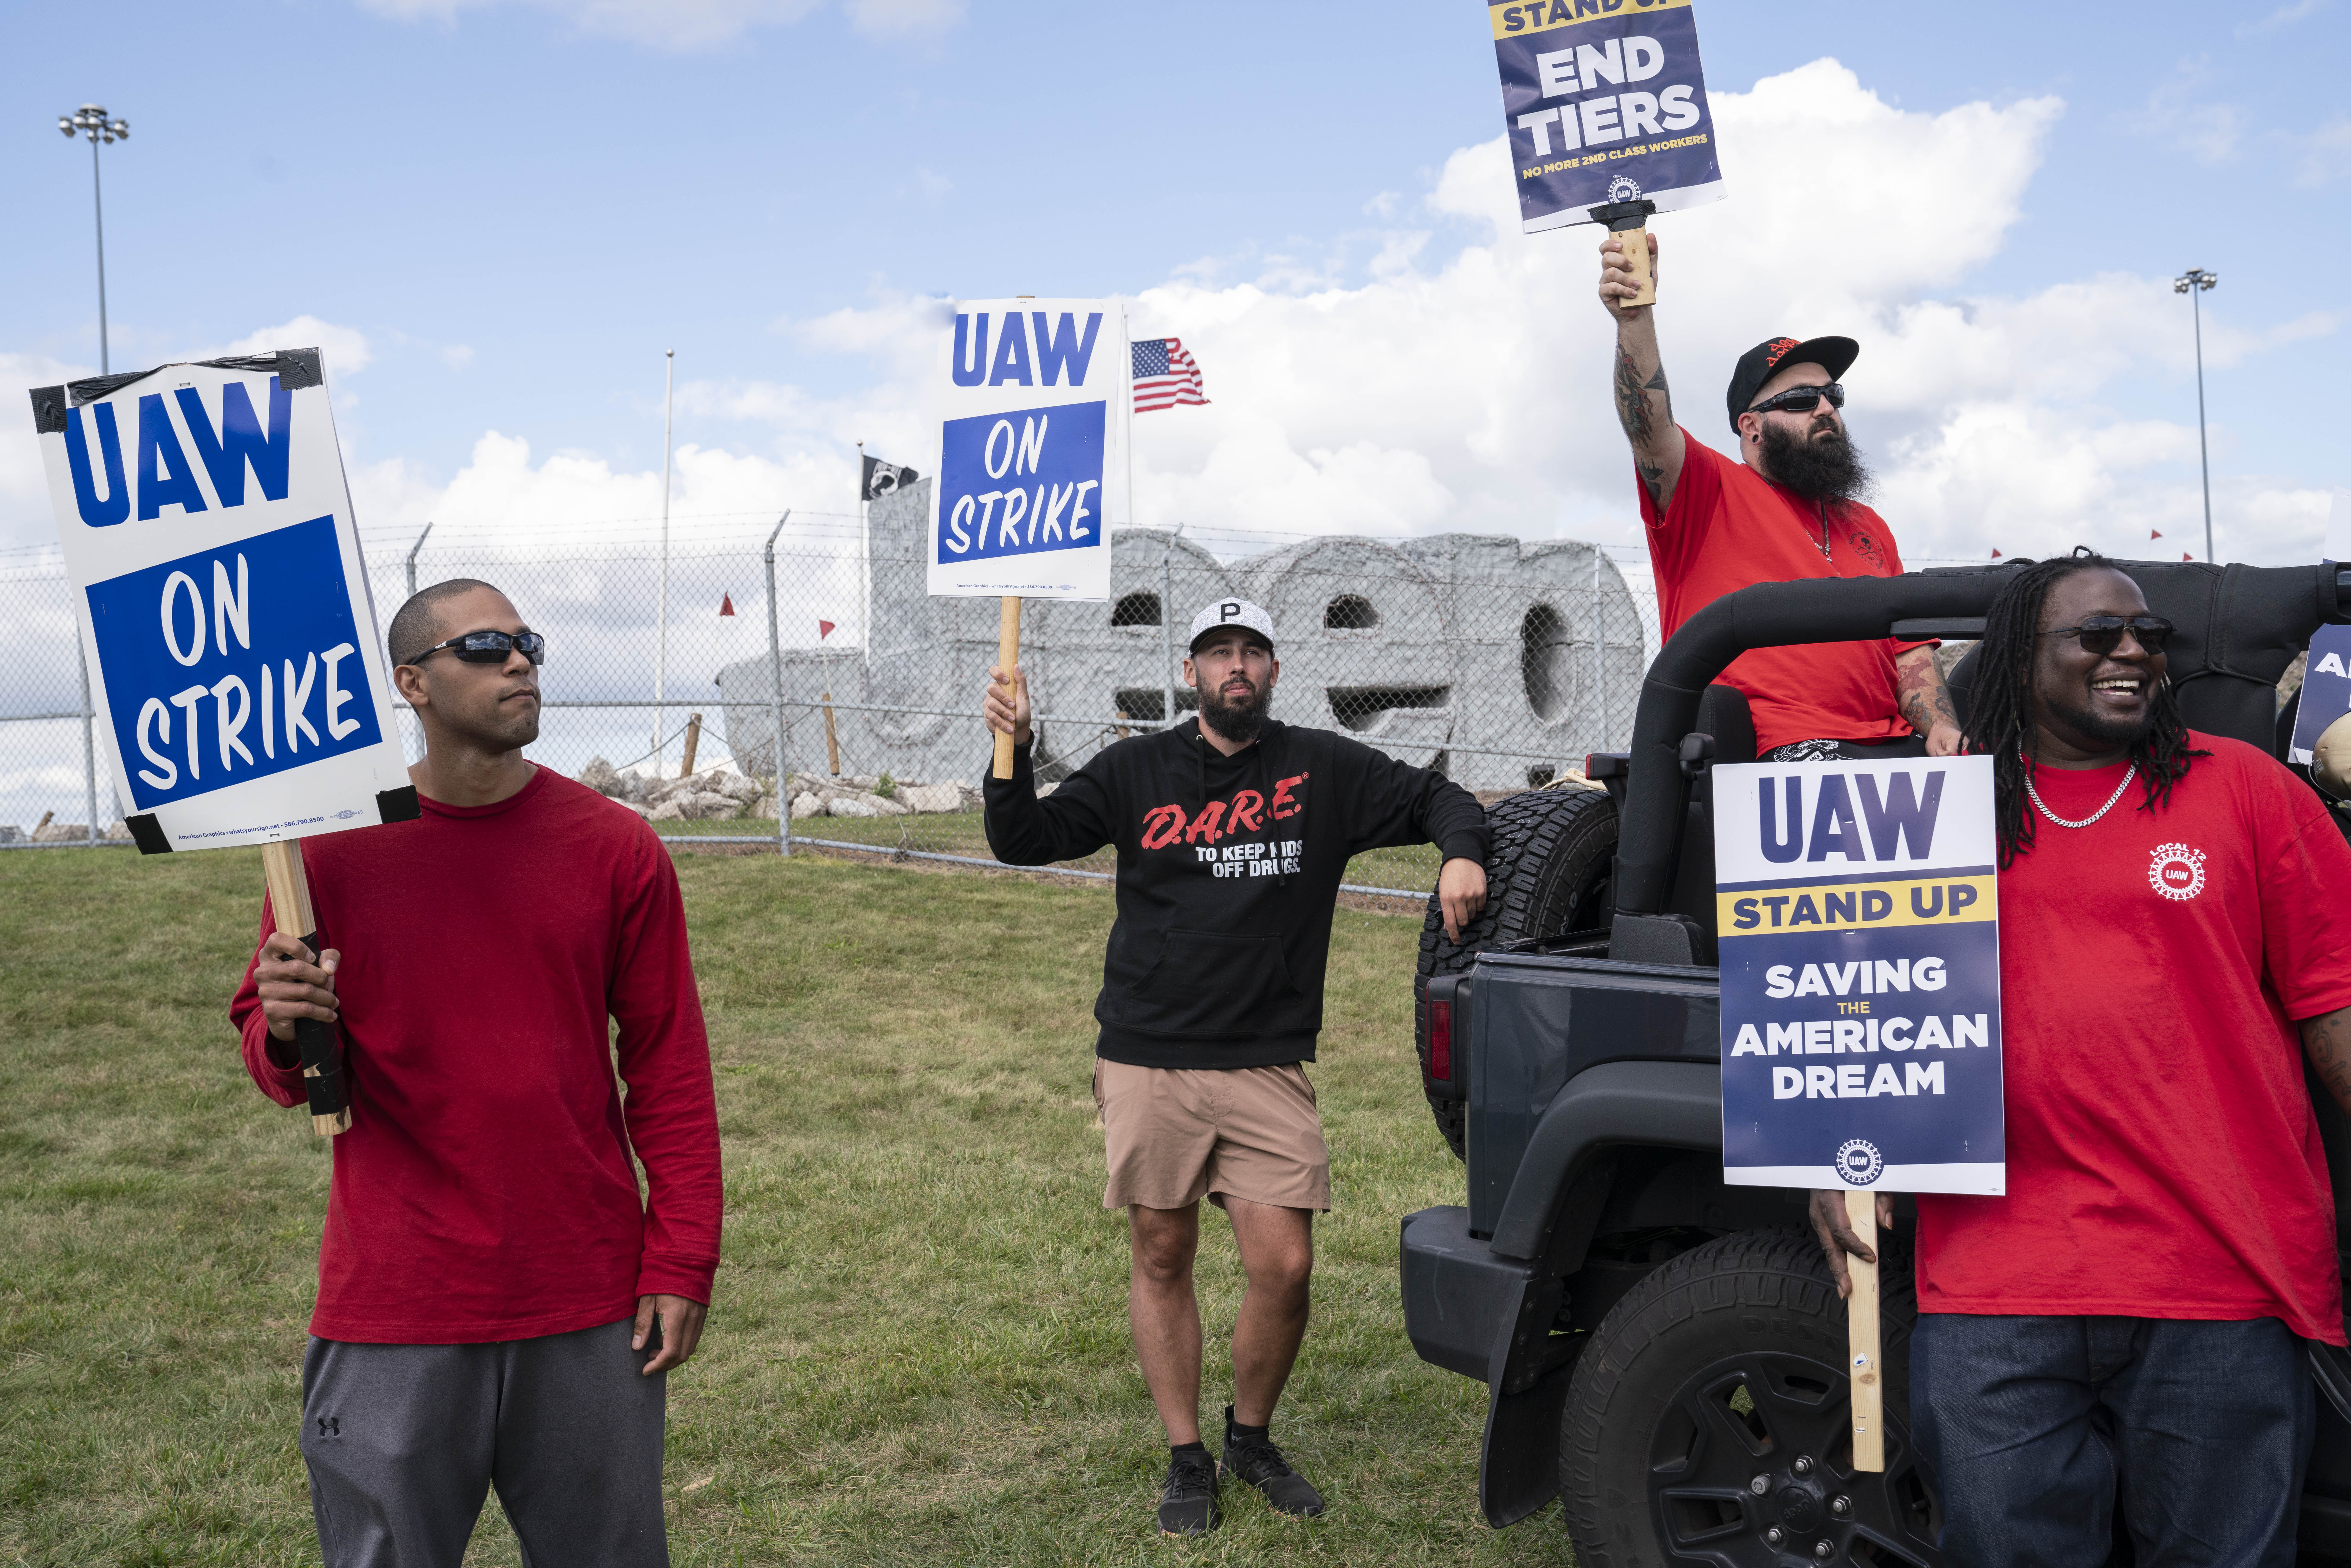 United Auto Workers (U.A.W.) members Kaleb Delfine, Bryan Broecker, Michael Gatto and James Triplett picket outside the Jeep Plant on September 18, 2023 in Toledo, Ohio. The U.A.W. walked out of three locations on Thursday night at midnight, marking the first time they've been simultaneously on strike at Ford, General Motors, and Stellantis the big three automakers. (Photo by Sarah Rice/Getty Images)